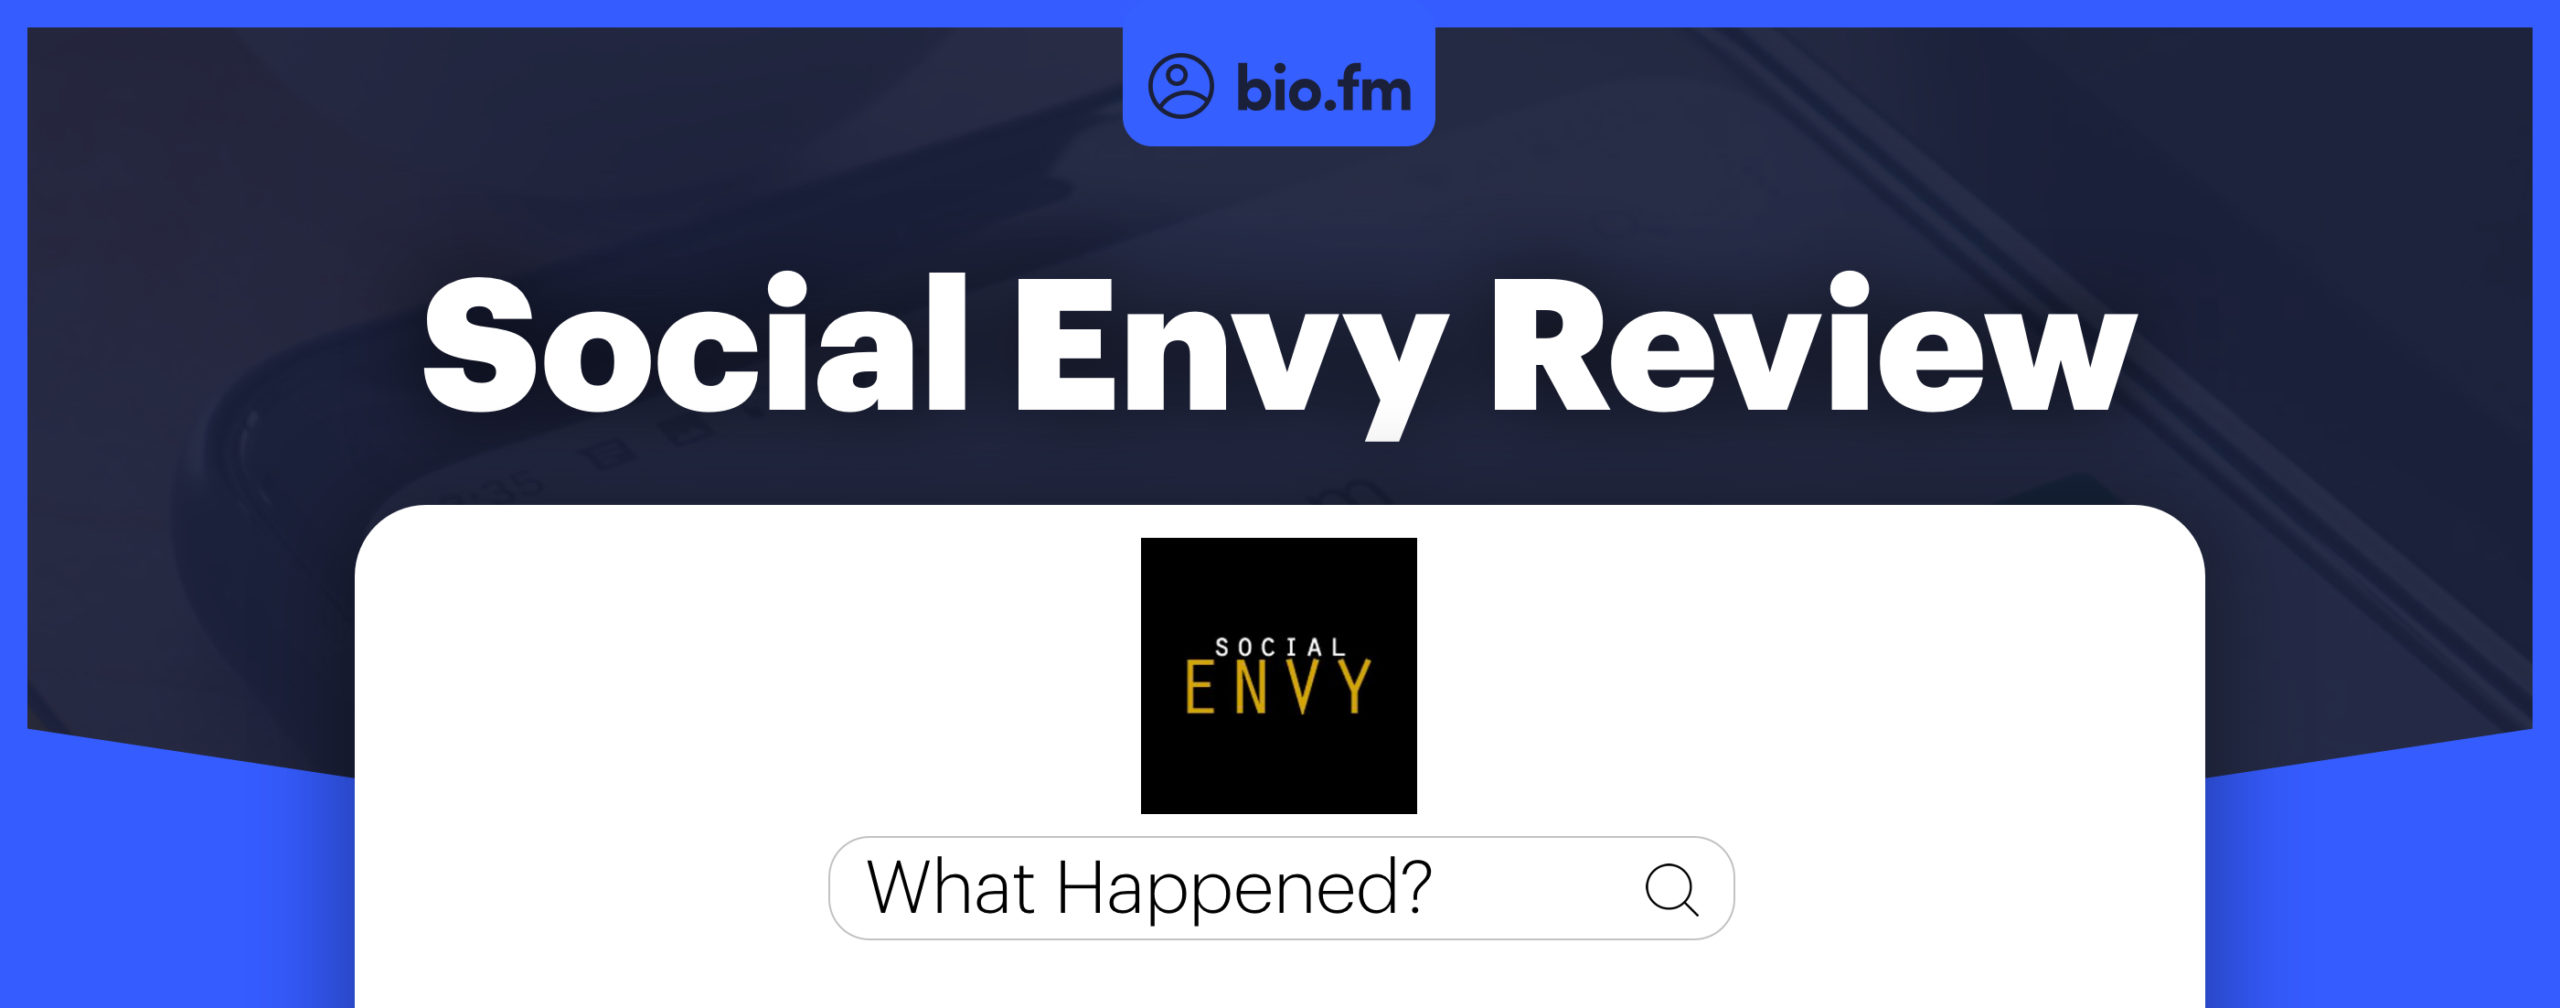 social envy review featured image